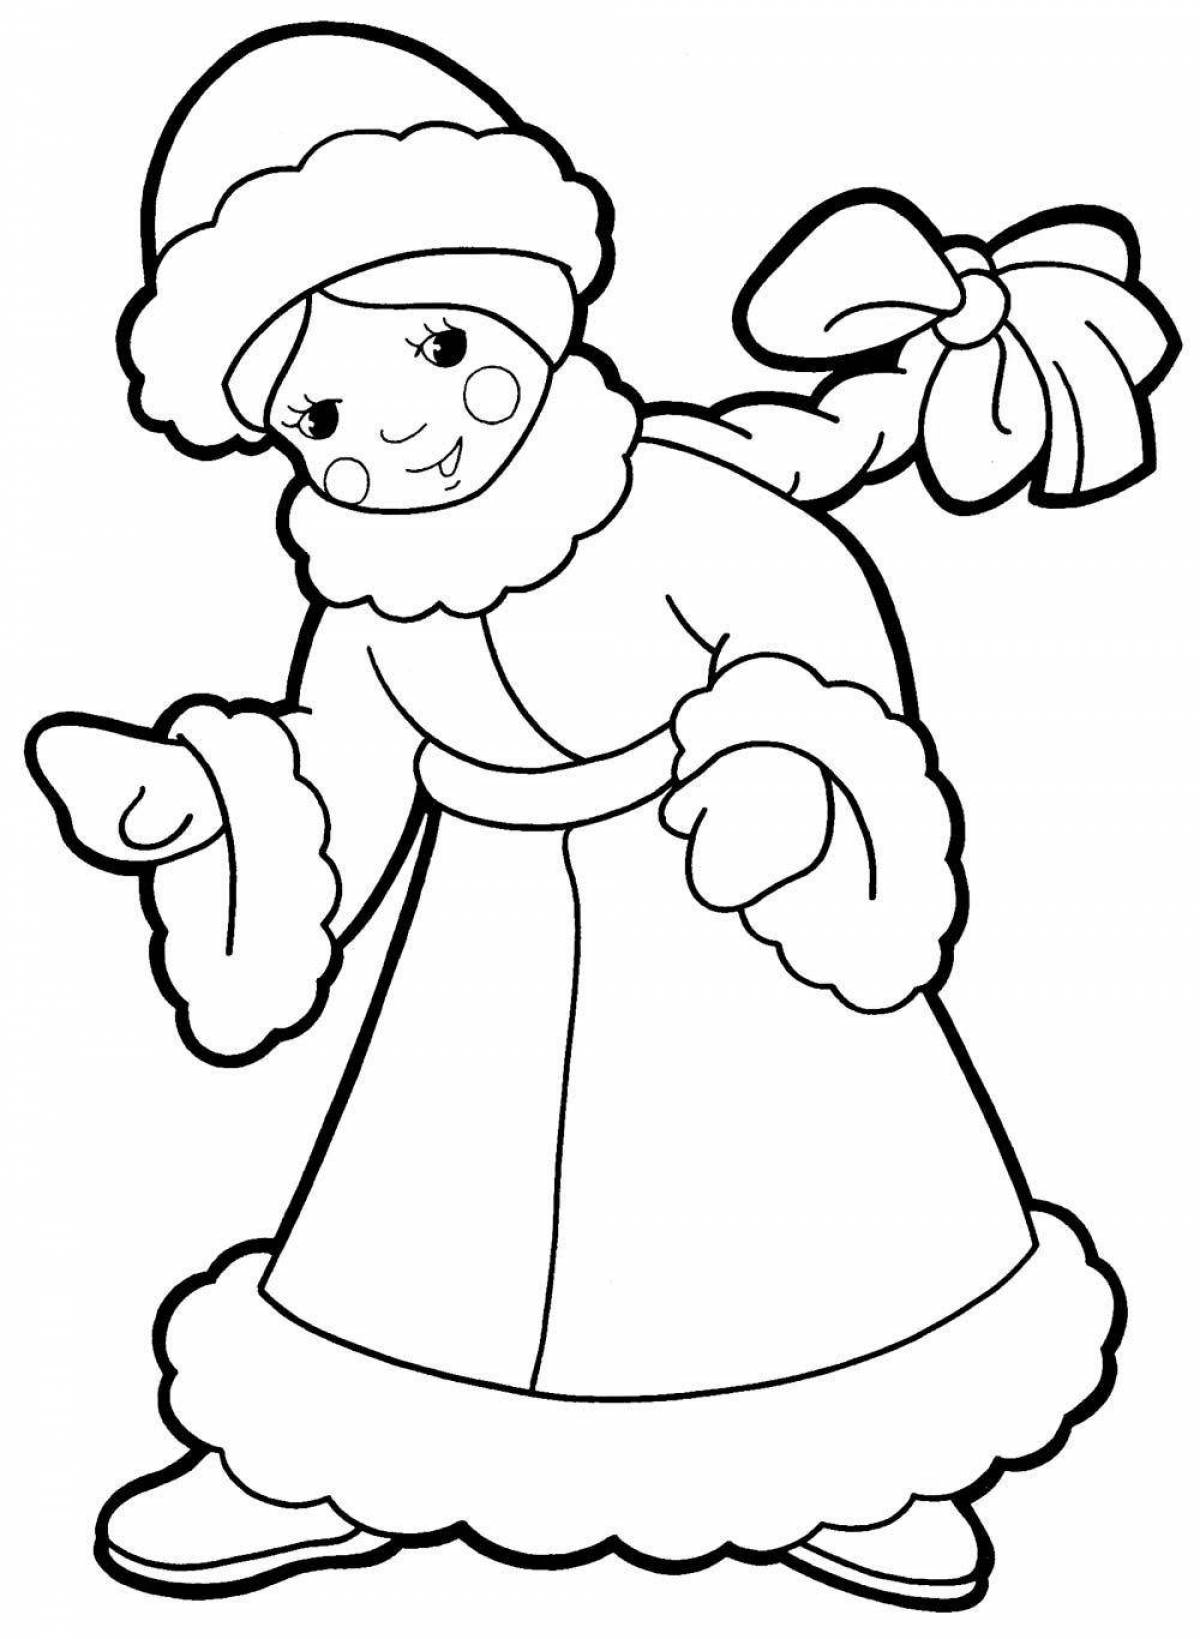 Snow Maiden's charming face coloring page